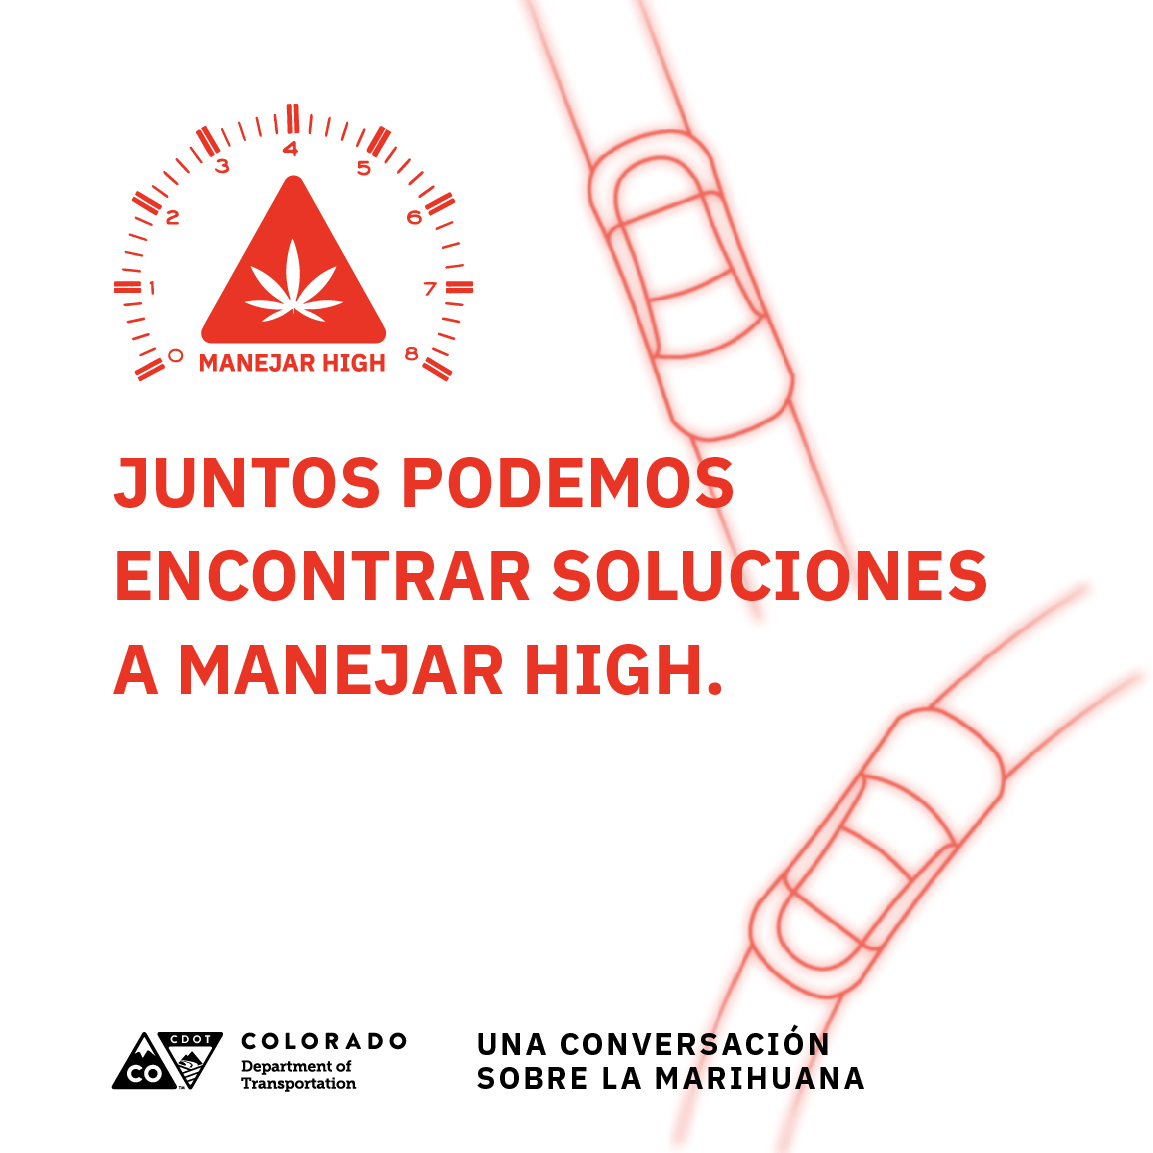 CD038_CannabisConversations_GraphicKit_Mech_v1_Spanish_Square_F.jpg detail image